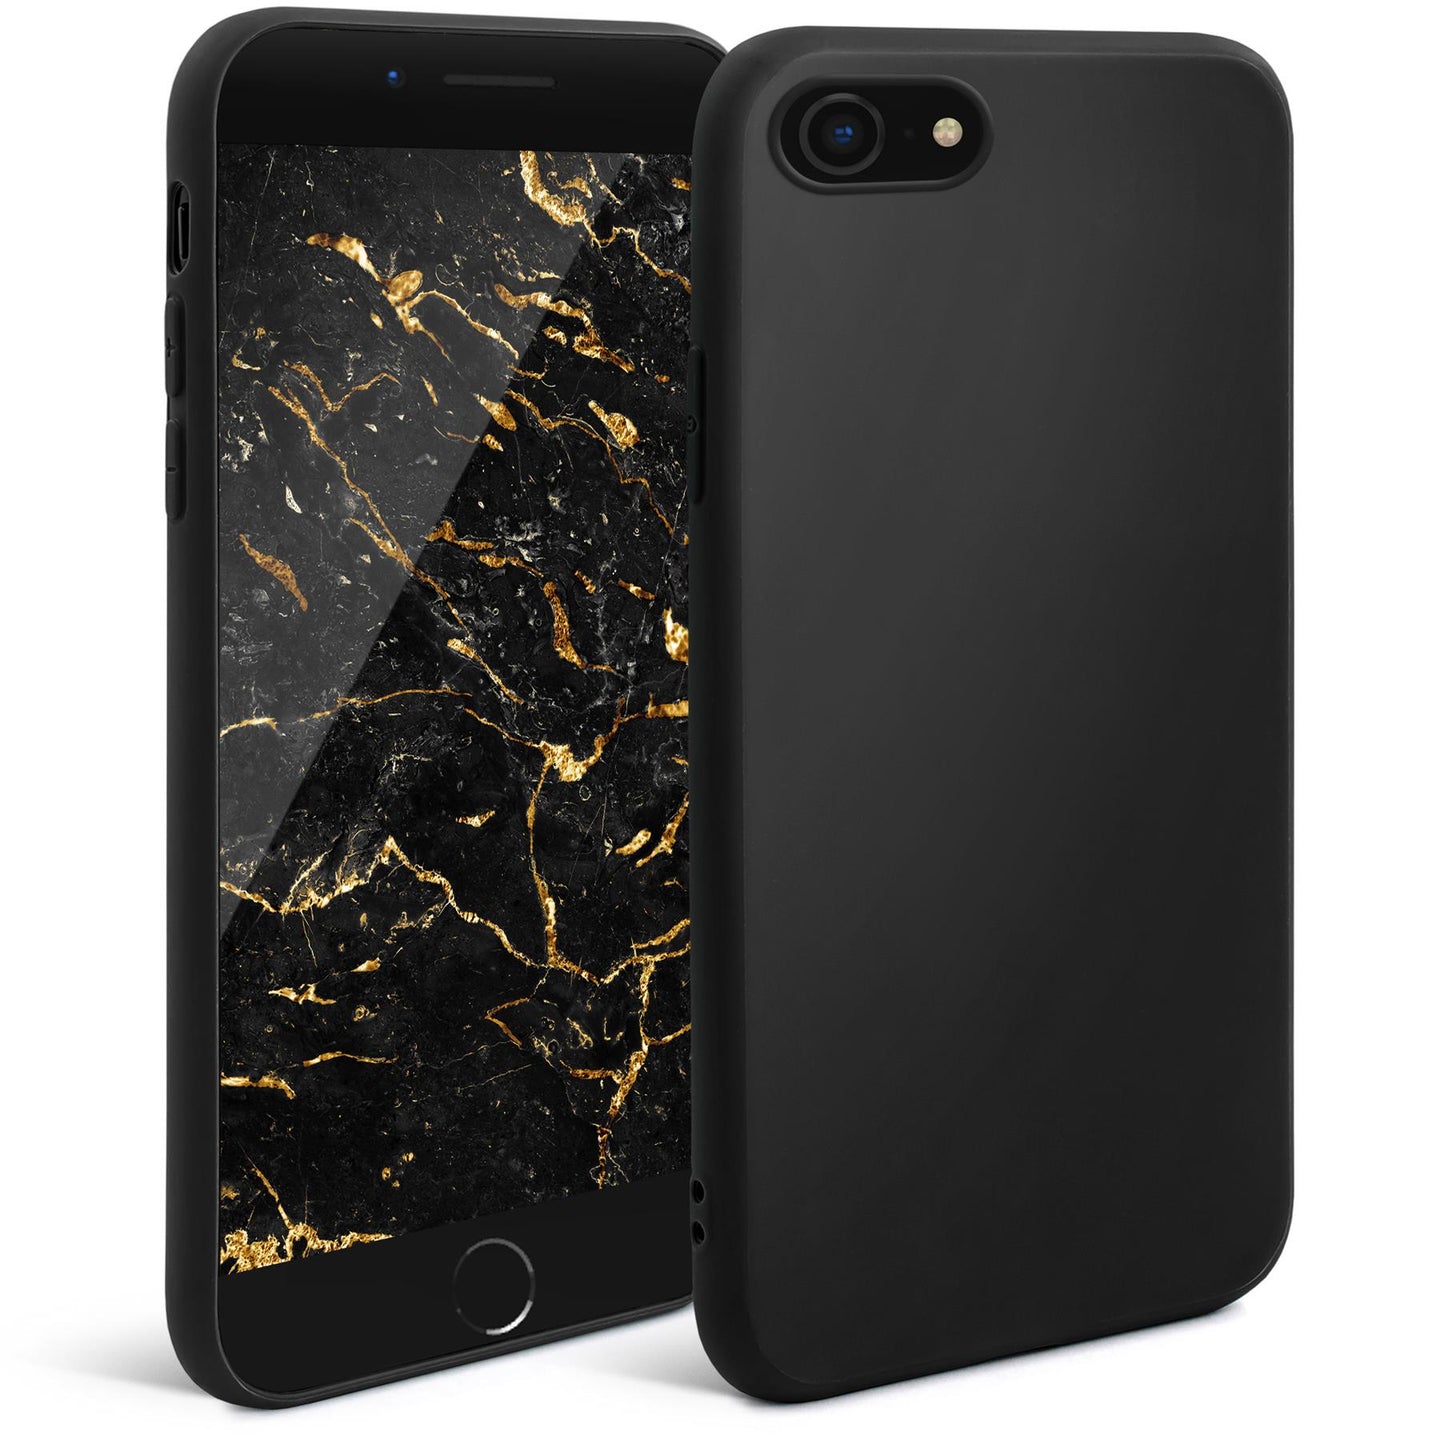 Moozy Minimalist Series Silicone Case for iPhone SE 2020, iPhone 8 and iPhone 7, Black - Matte Finish Slim Soft TPU Cover